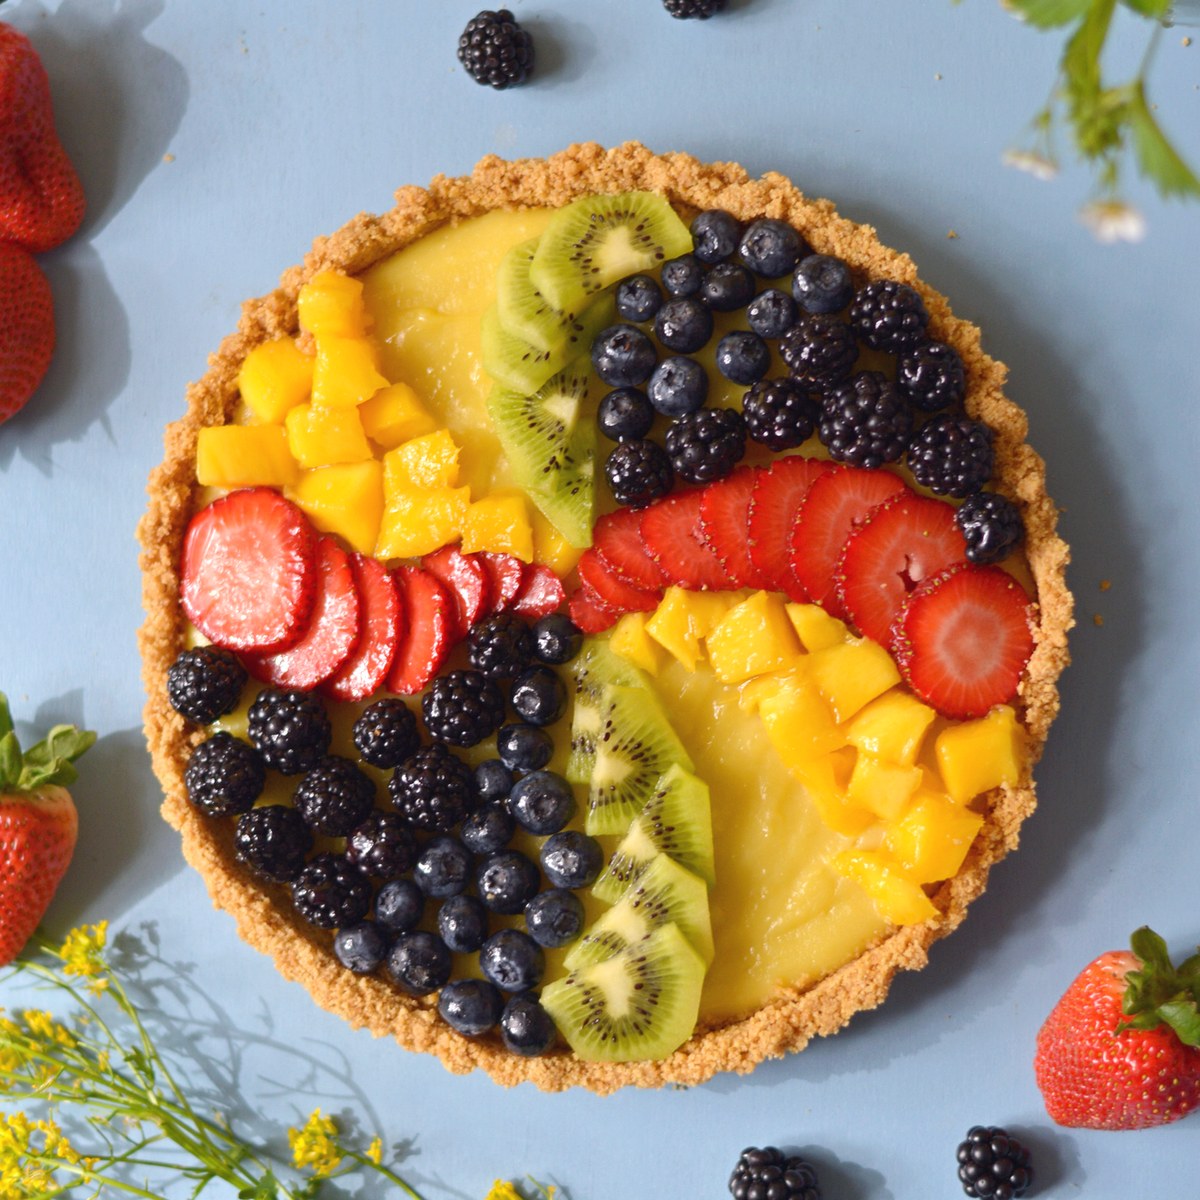 A fruit tart with berries and fruits on top.